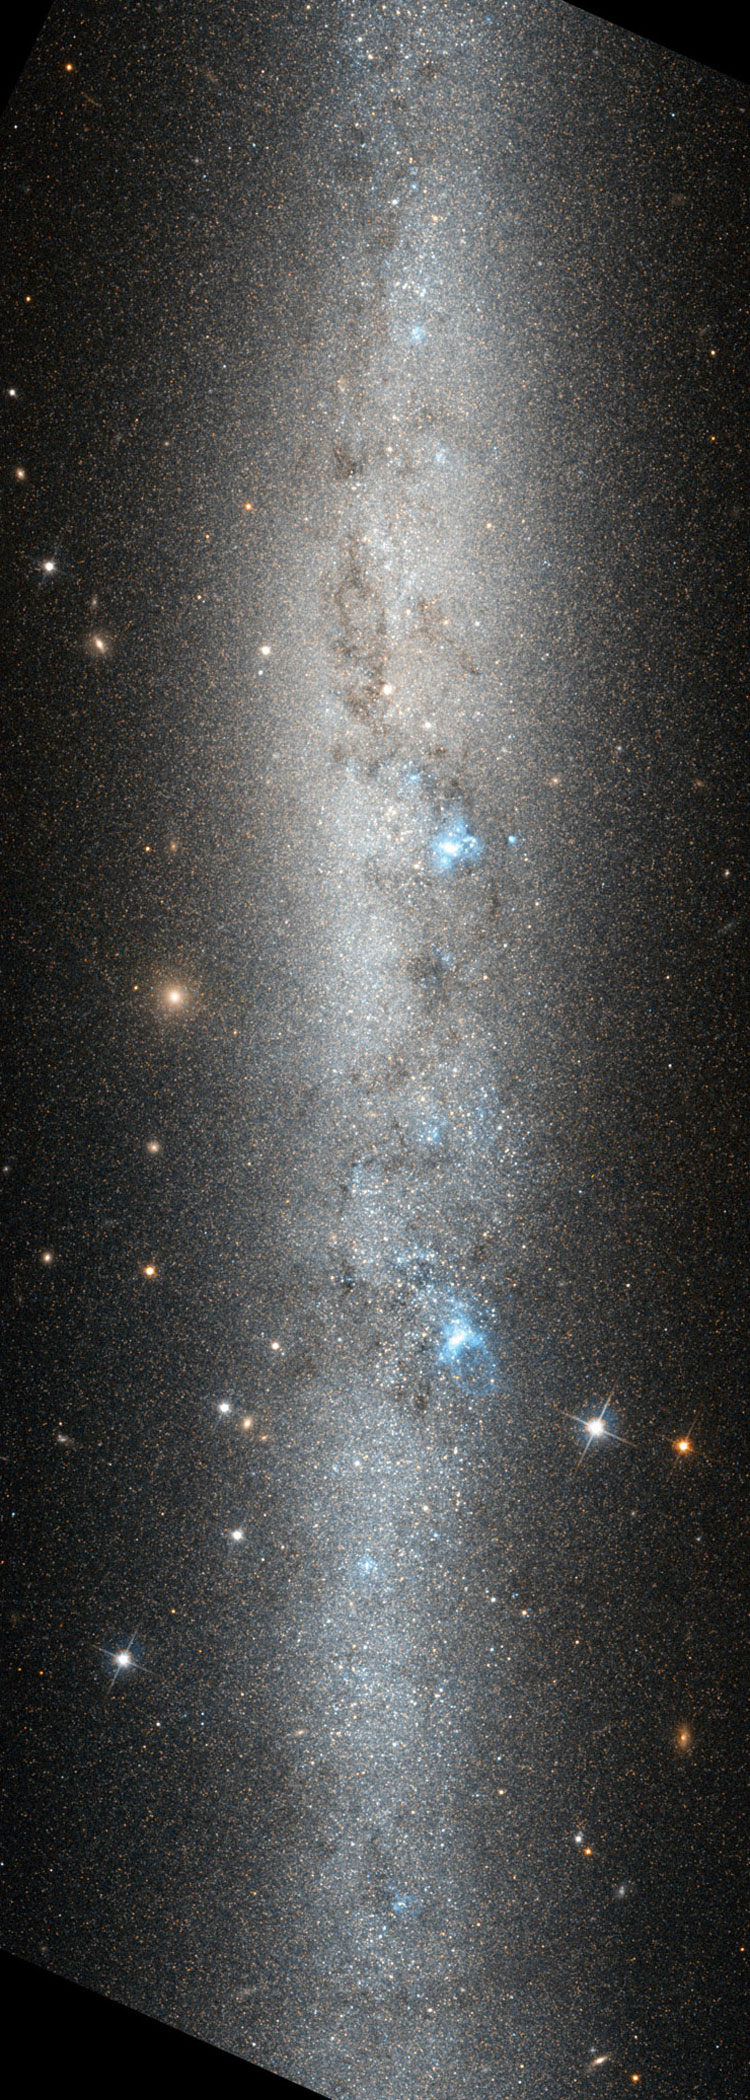 HST image of part of spiral galaxy IC 5052